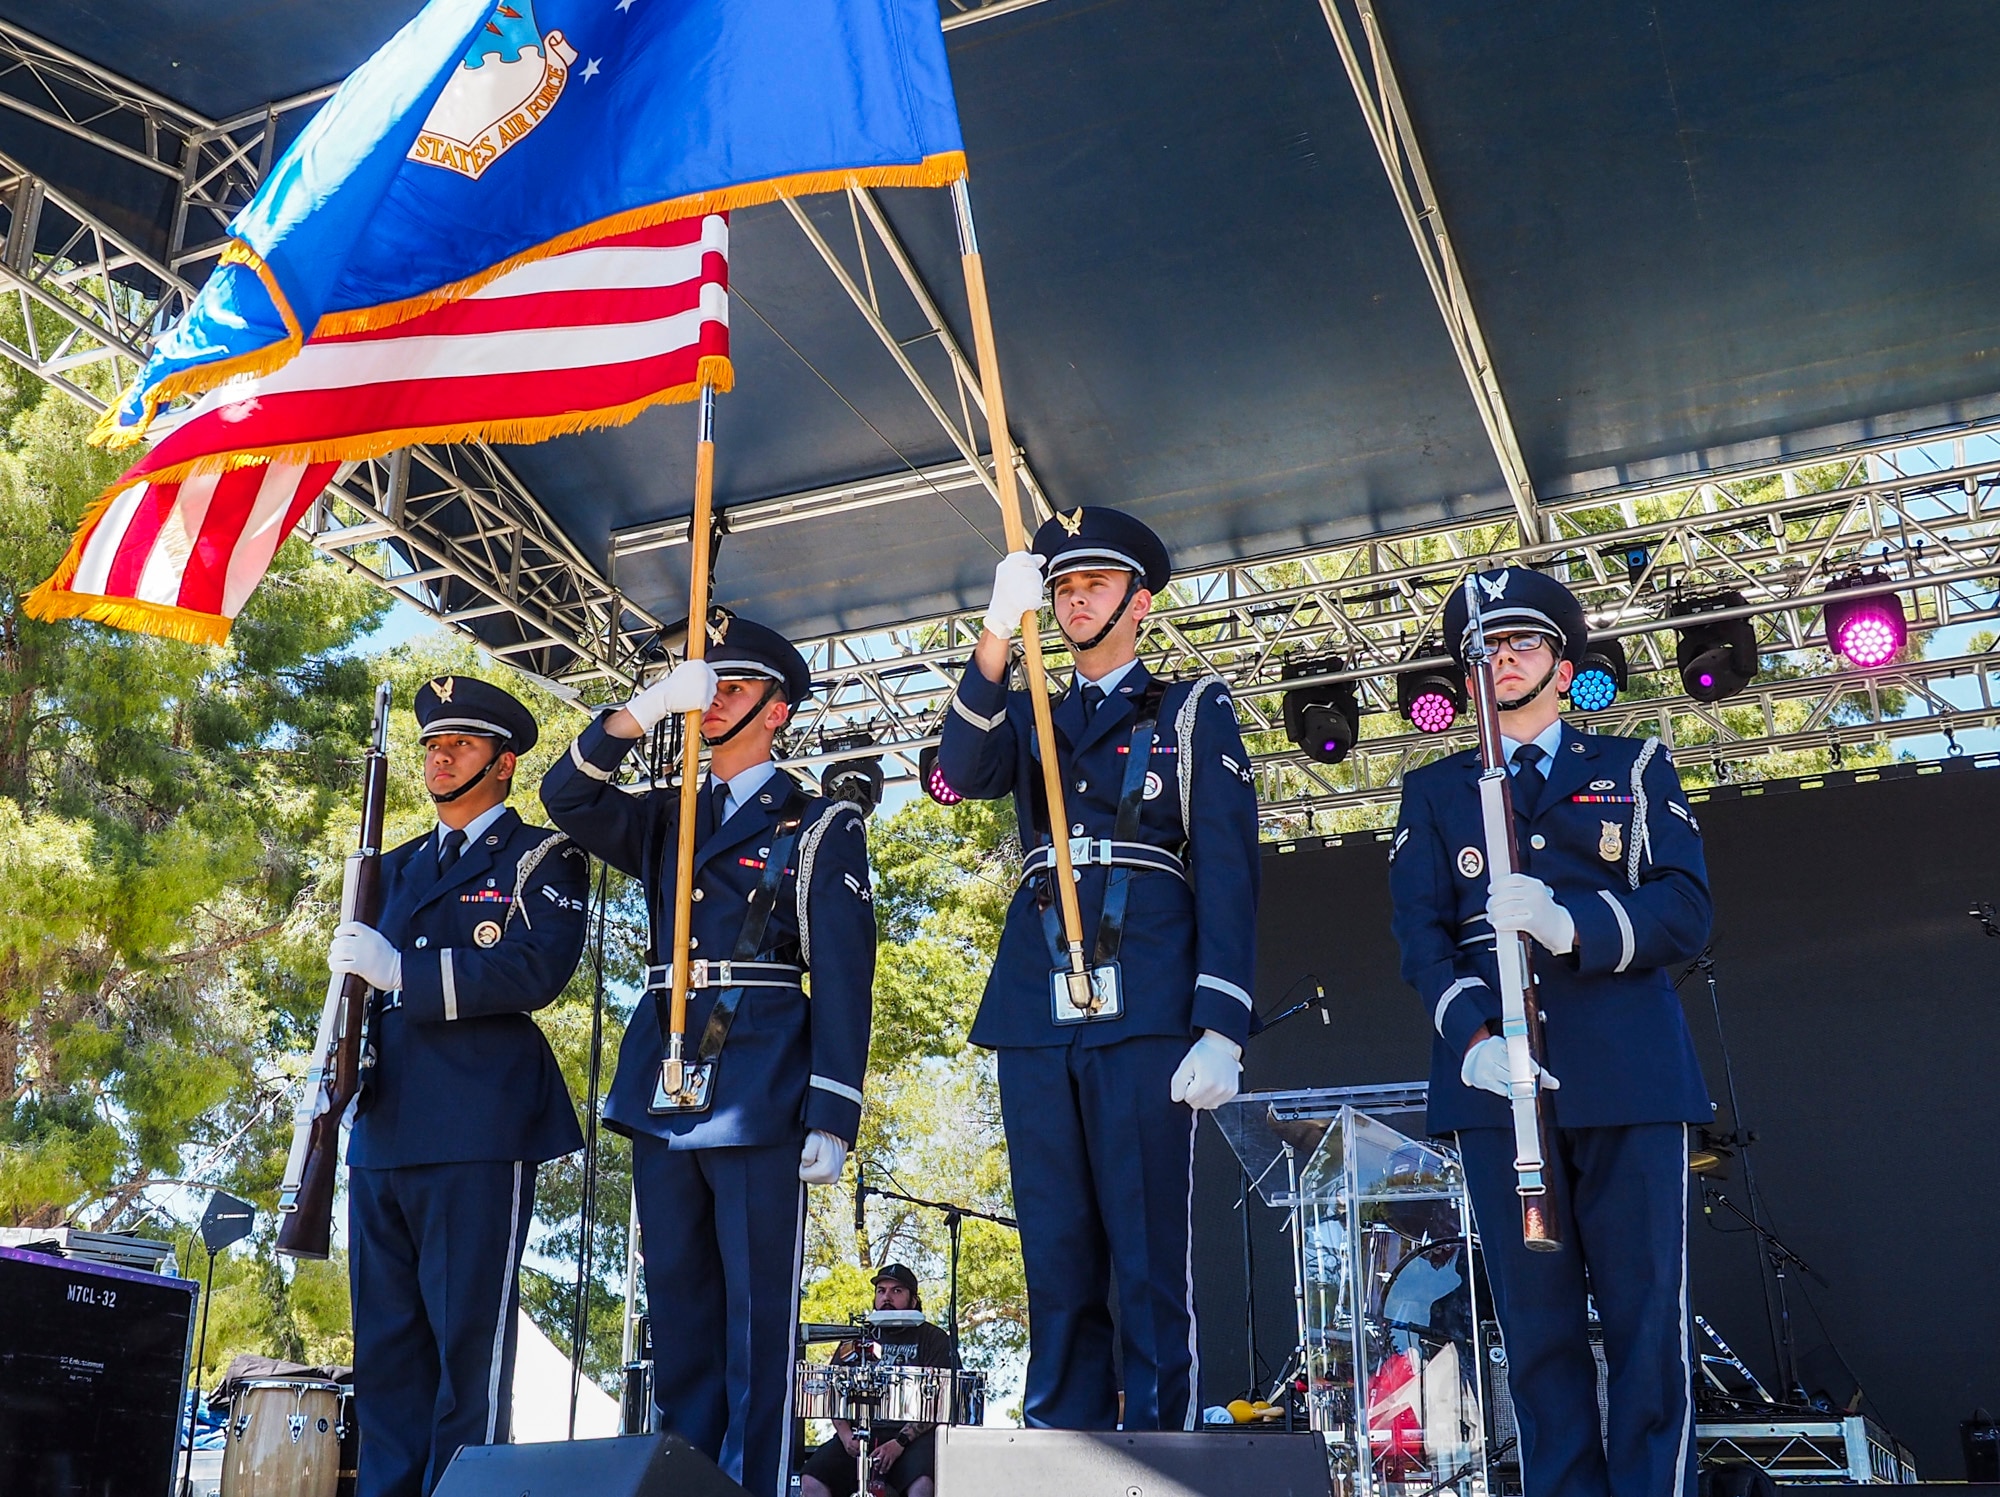 Air Force honor guardsmen present the colors at the American Patriot Festival in Las Vegas, May 21, 2017. The American Patriot Festival focused on supporting veterans and their families with live concerts, vendor stands and a car show with nearly 300 cars. (U.S. Air Force photo by Master Sgt. Heidi West/Released)